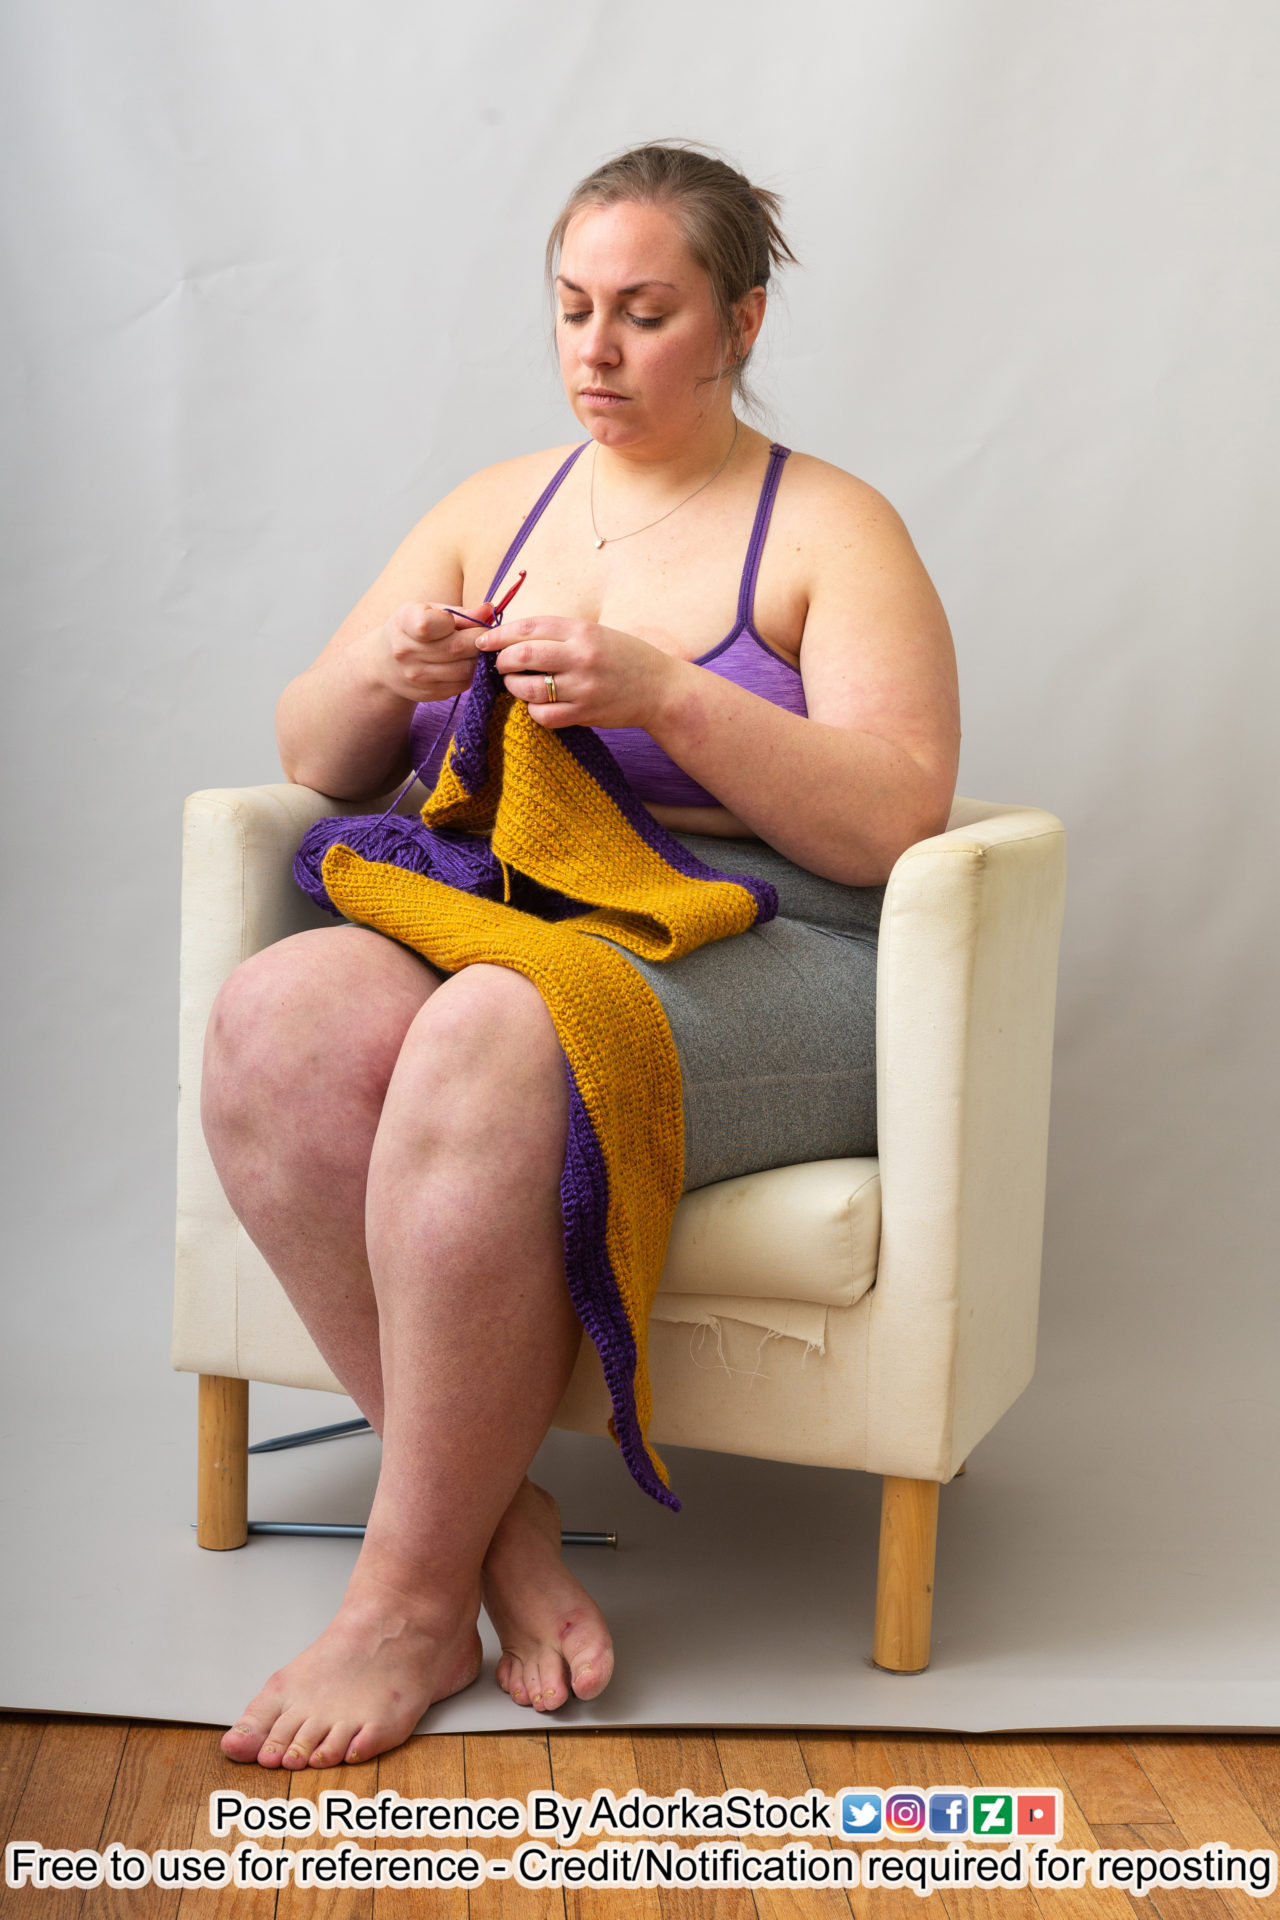 A woman in a purple sports bna and grey shorts sitting in a low backed beige arm chair crocheting a purple and yellow scarf. Her feet are crossed and she looks relaxed